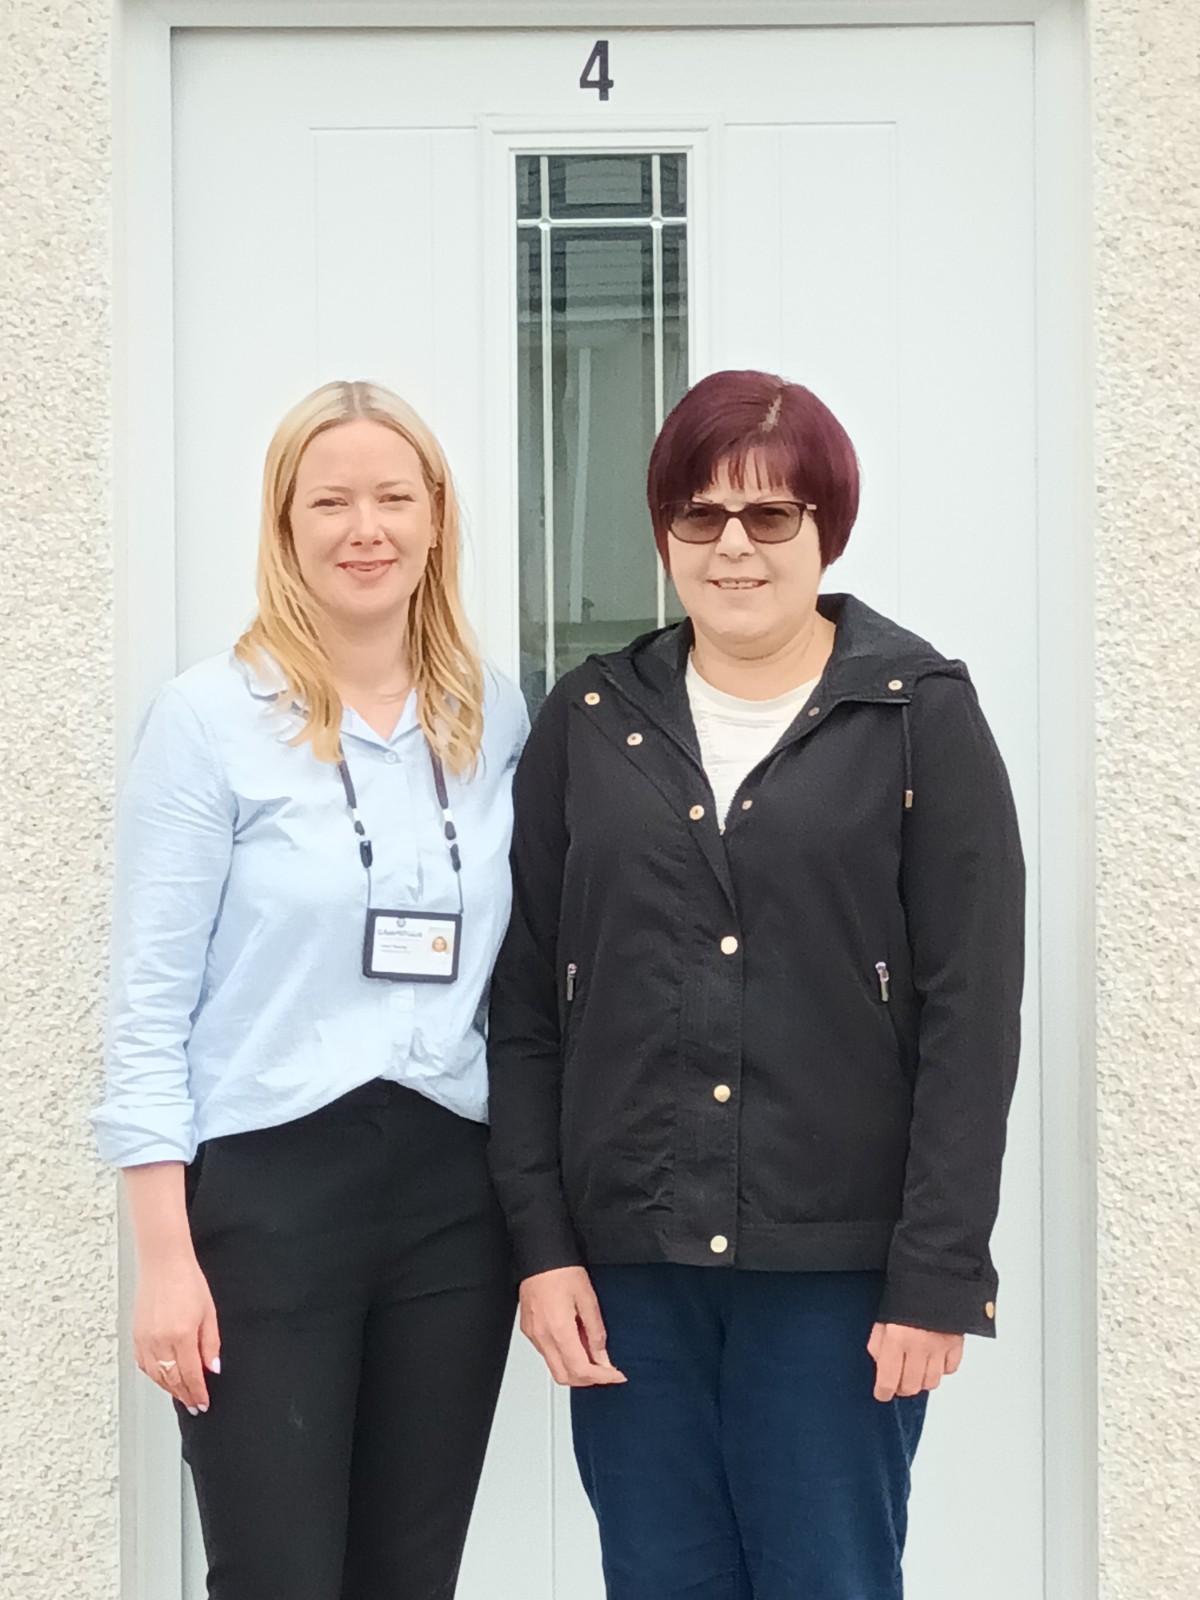 New tenants welcomed to sustainable homes in Elgin